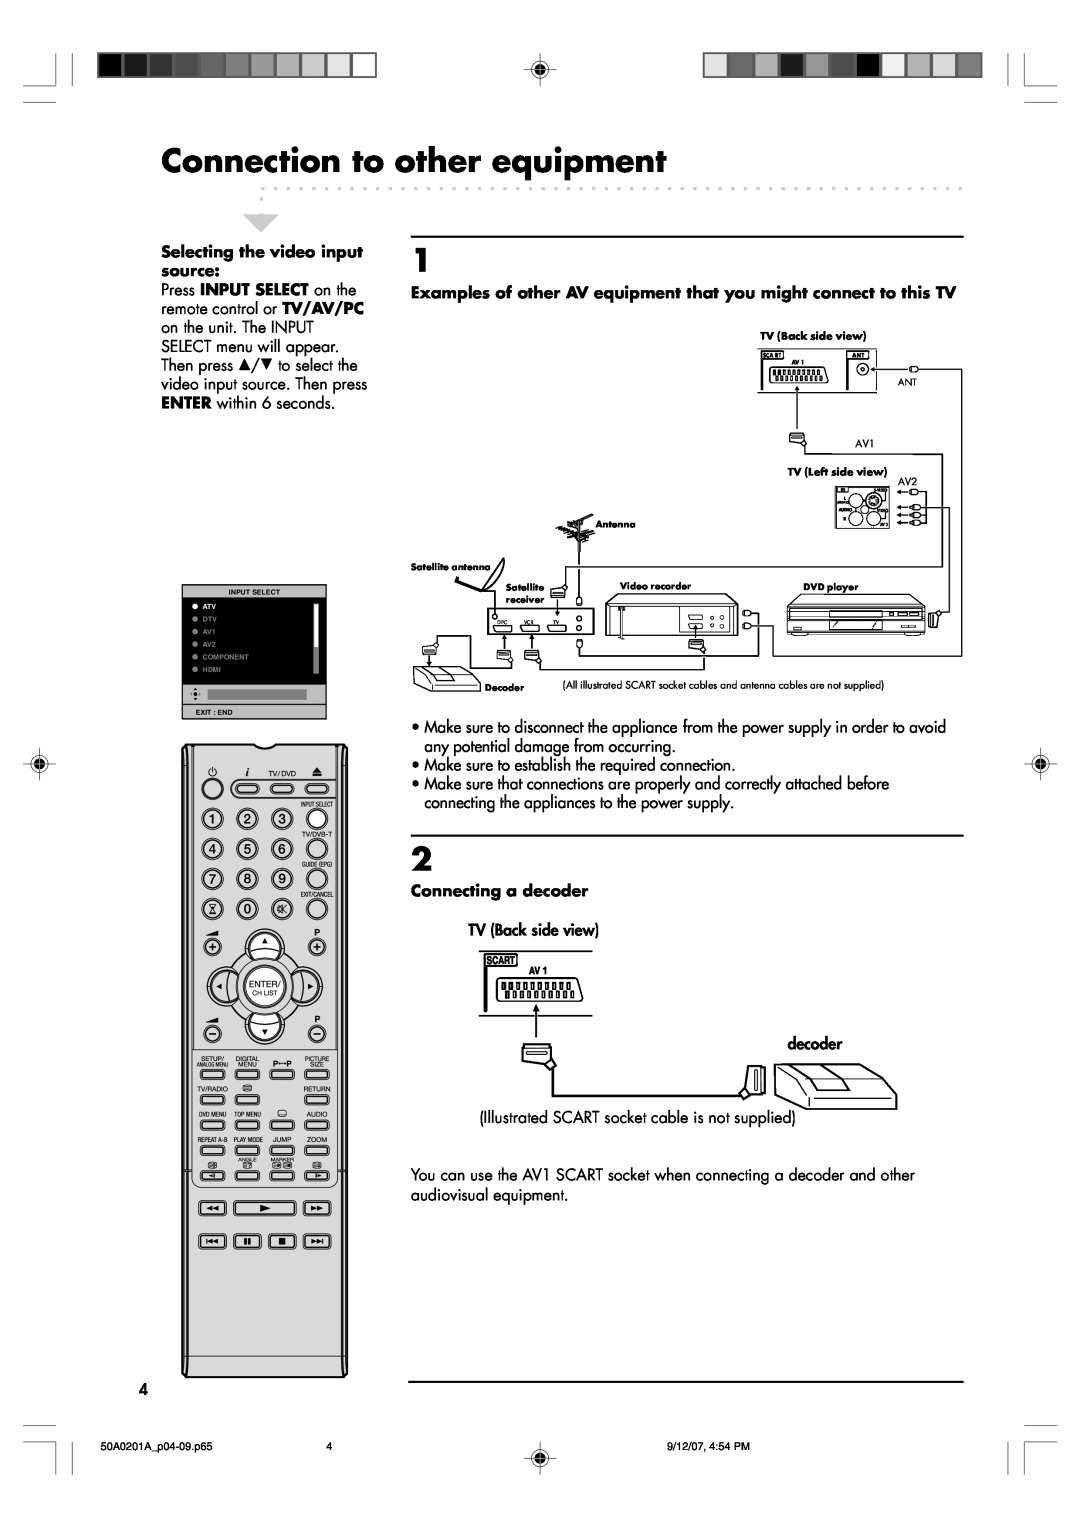 Sansui TV19PL120DVD instruction manual Connection to other equipment, Selecting the video input source 